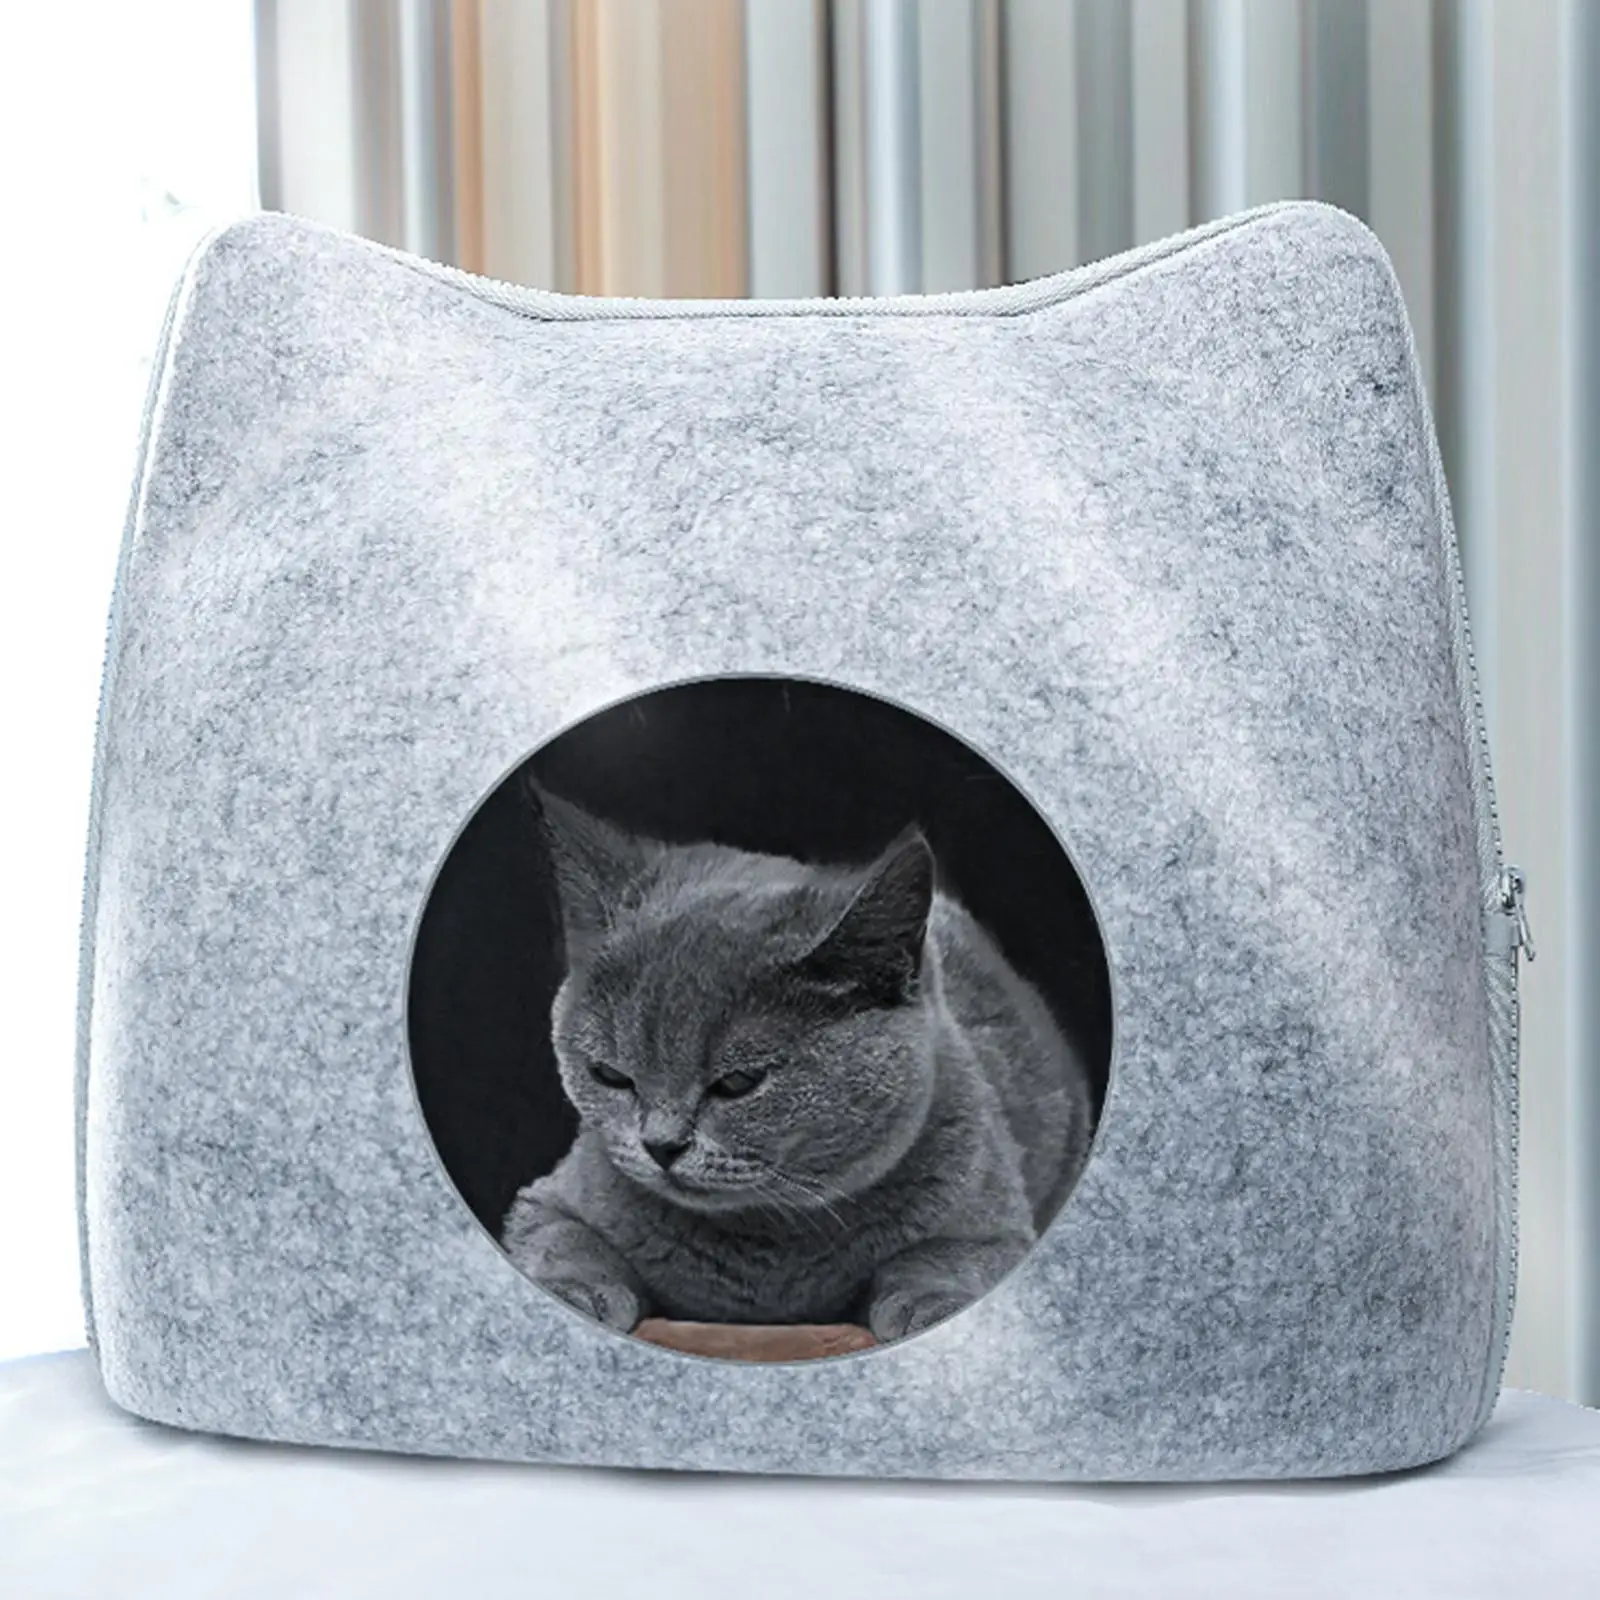 Pet Cat Cushion Bed Removable Washable Pet Supplies Interactive Play Toy